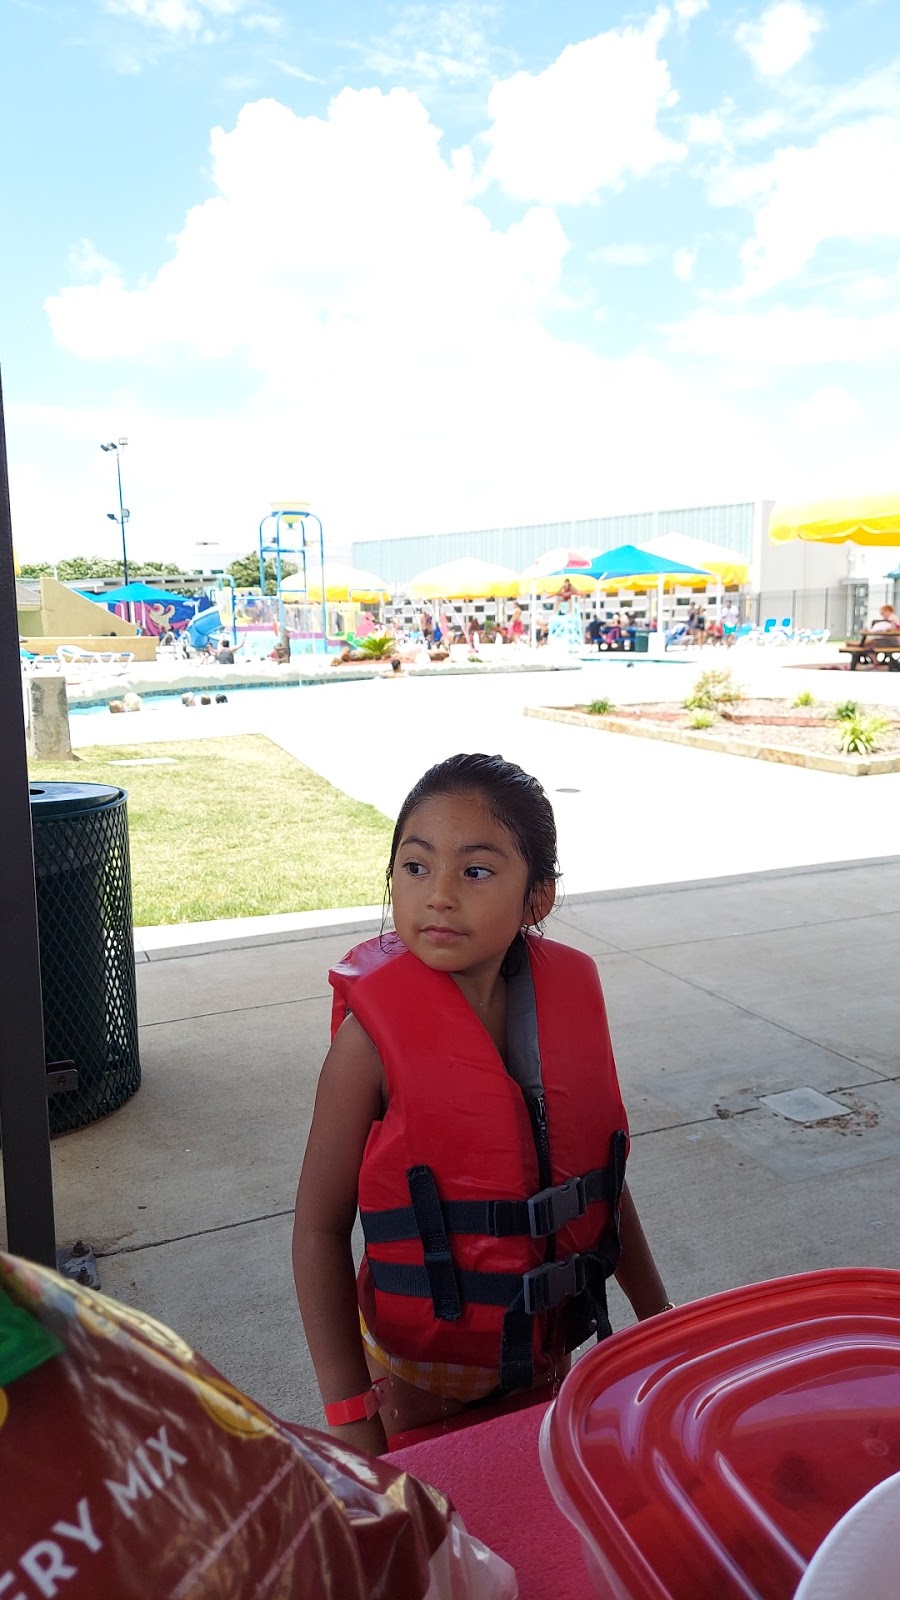 Euless Family Life Aquatic Park | 300 E Midway Dr, Euless, TX 76039 | Phone: (817) 399-4715